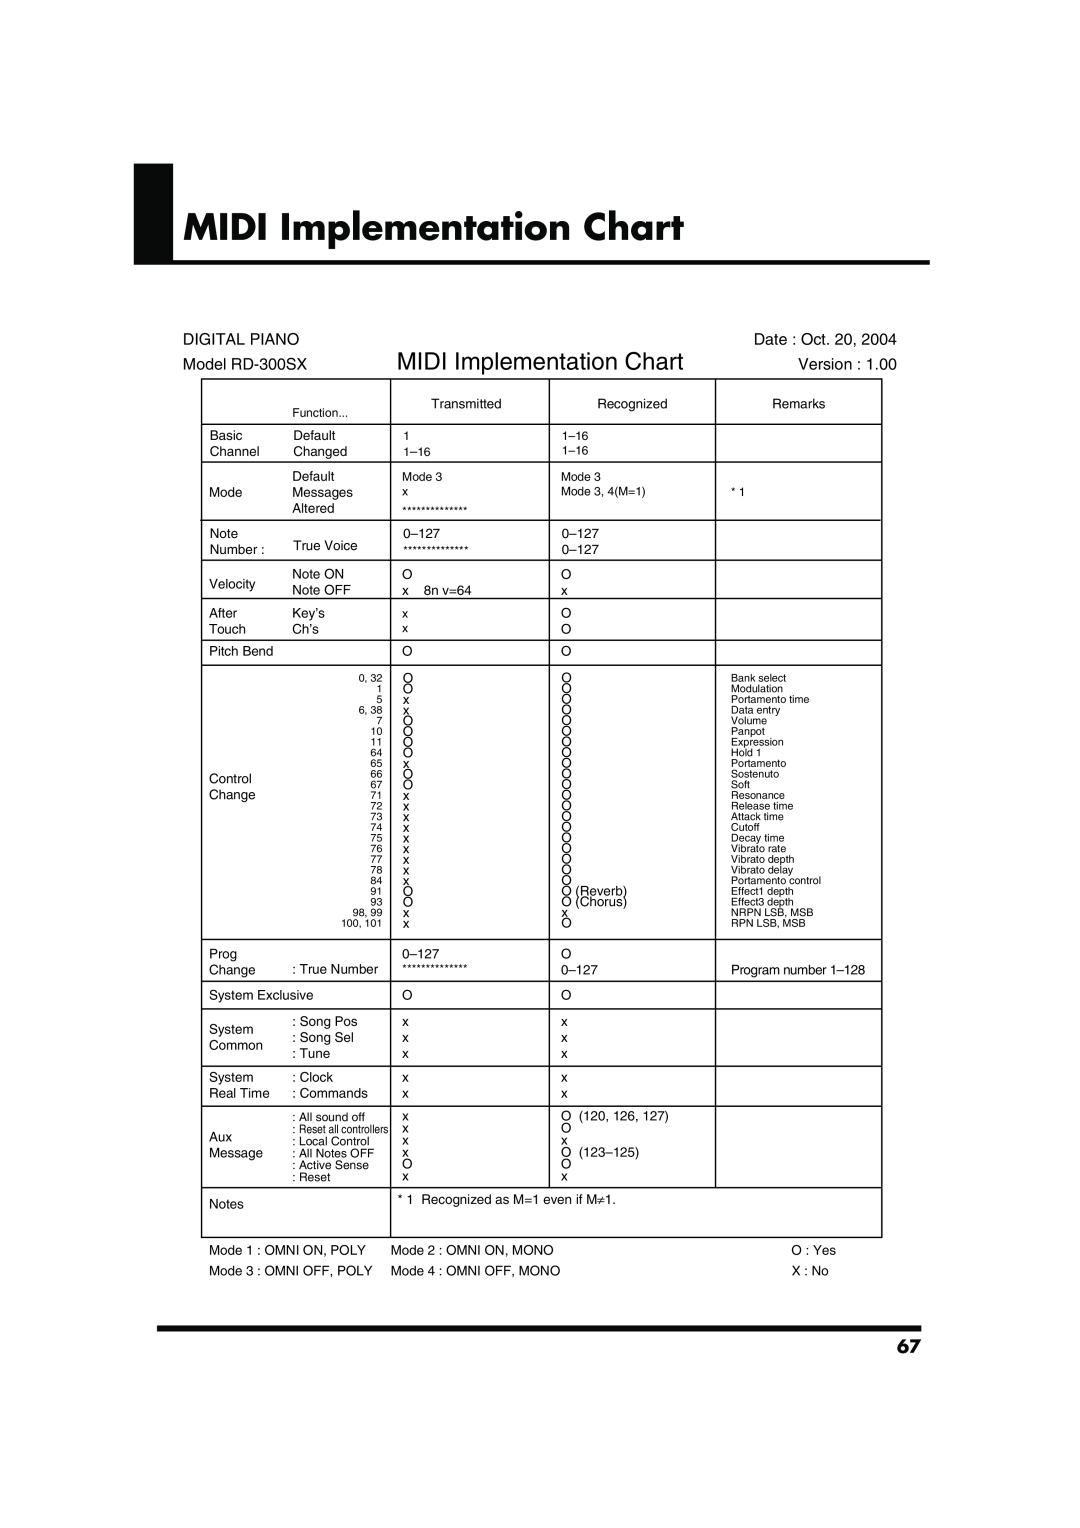 Roland owner manual MIDI Implementation Chart, DIGITAL PIANO Model RD-300SX, Date Oct. 20 Version 